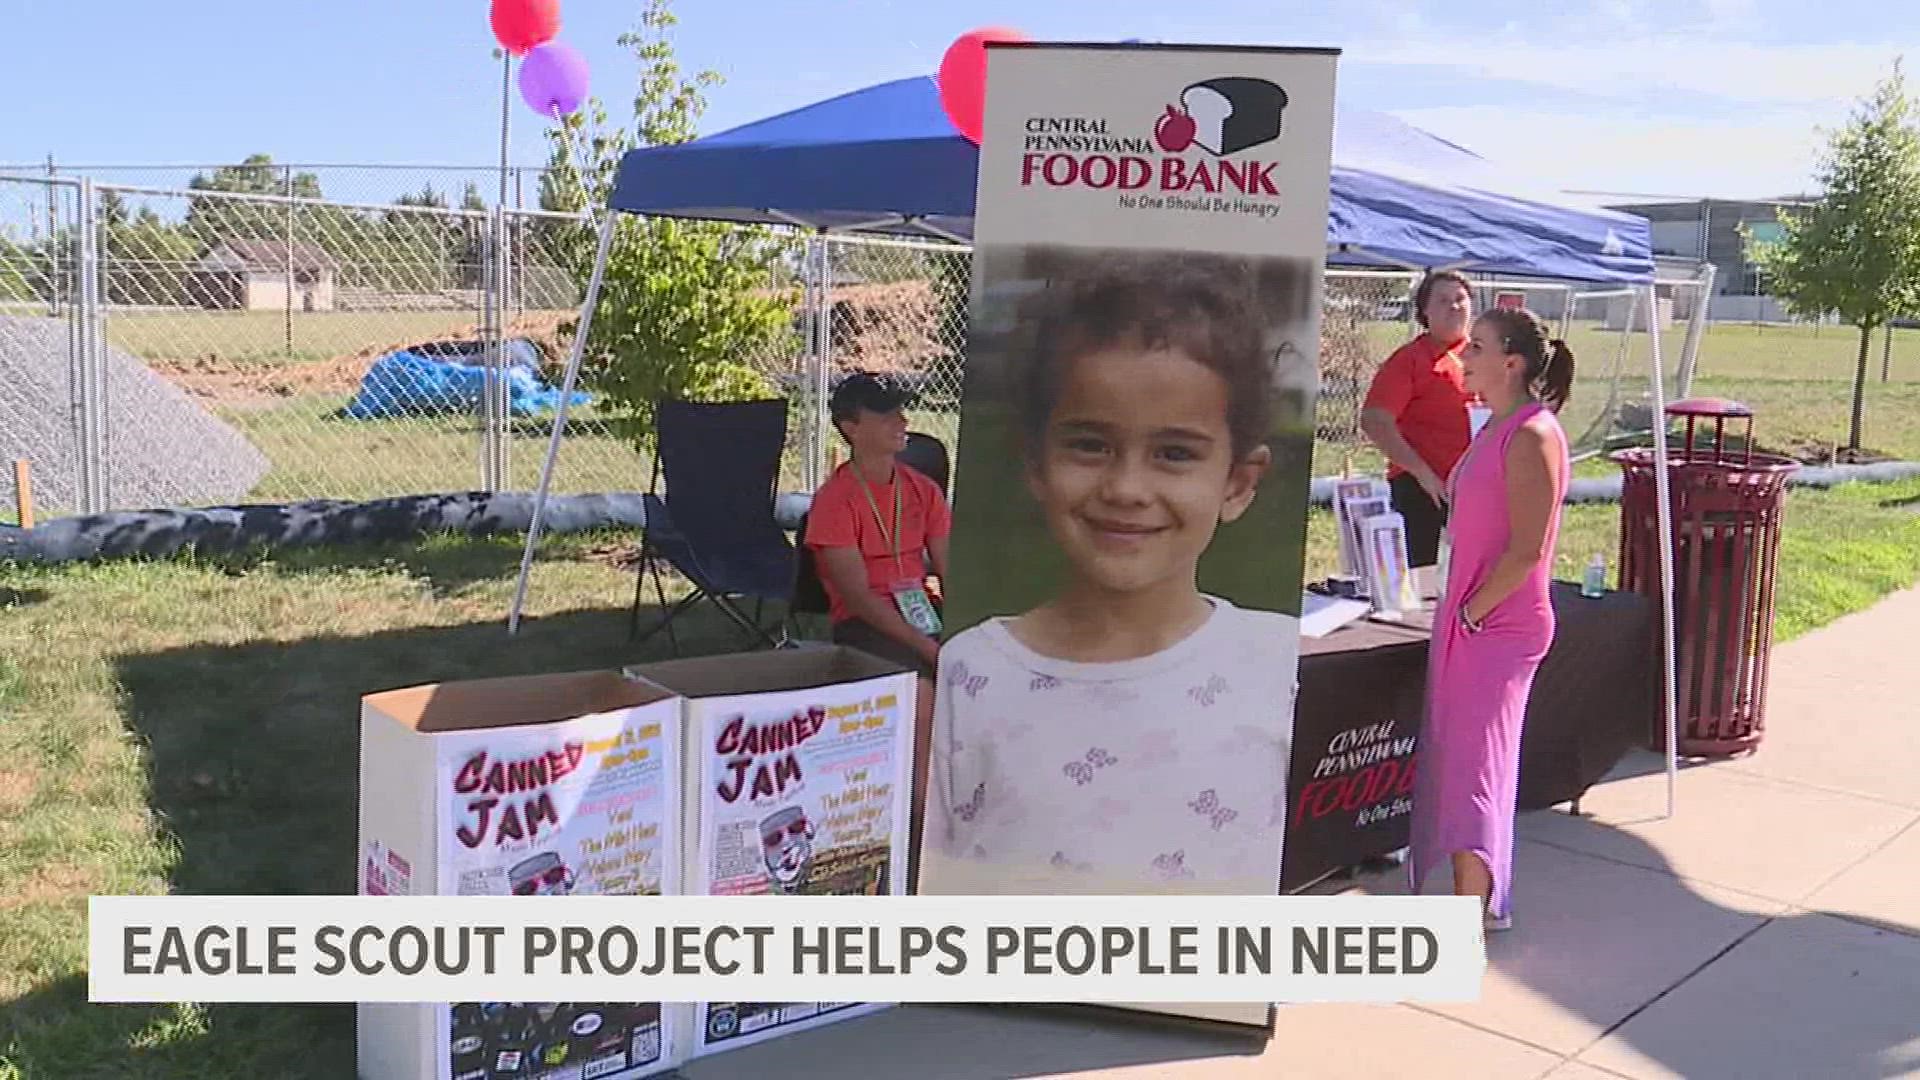 An Eagle Scout candidate with Troop 368 based in Harrisburg organized a music festival to raise awareness and gather donations to address food insecurity.